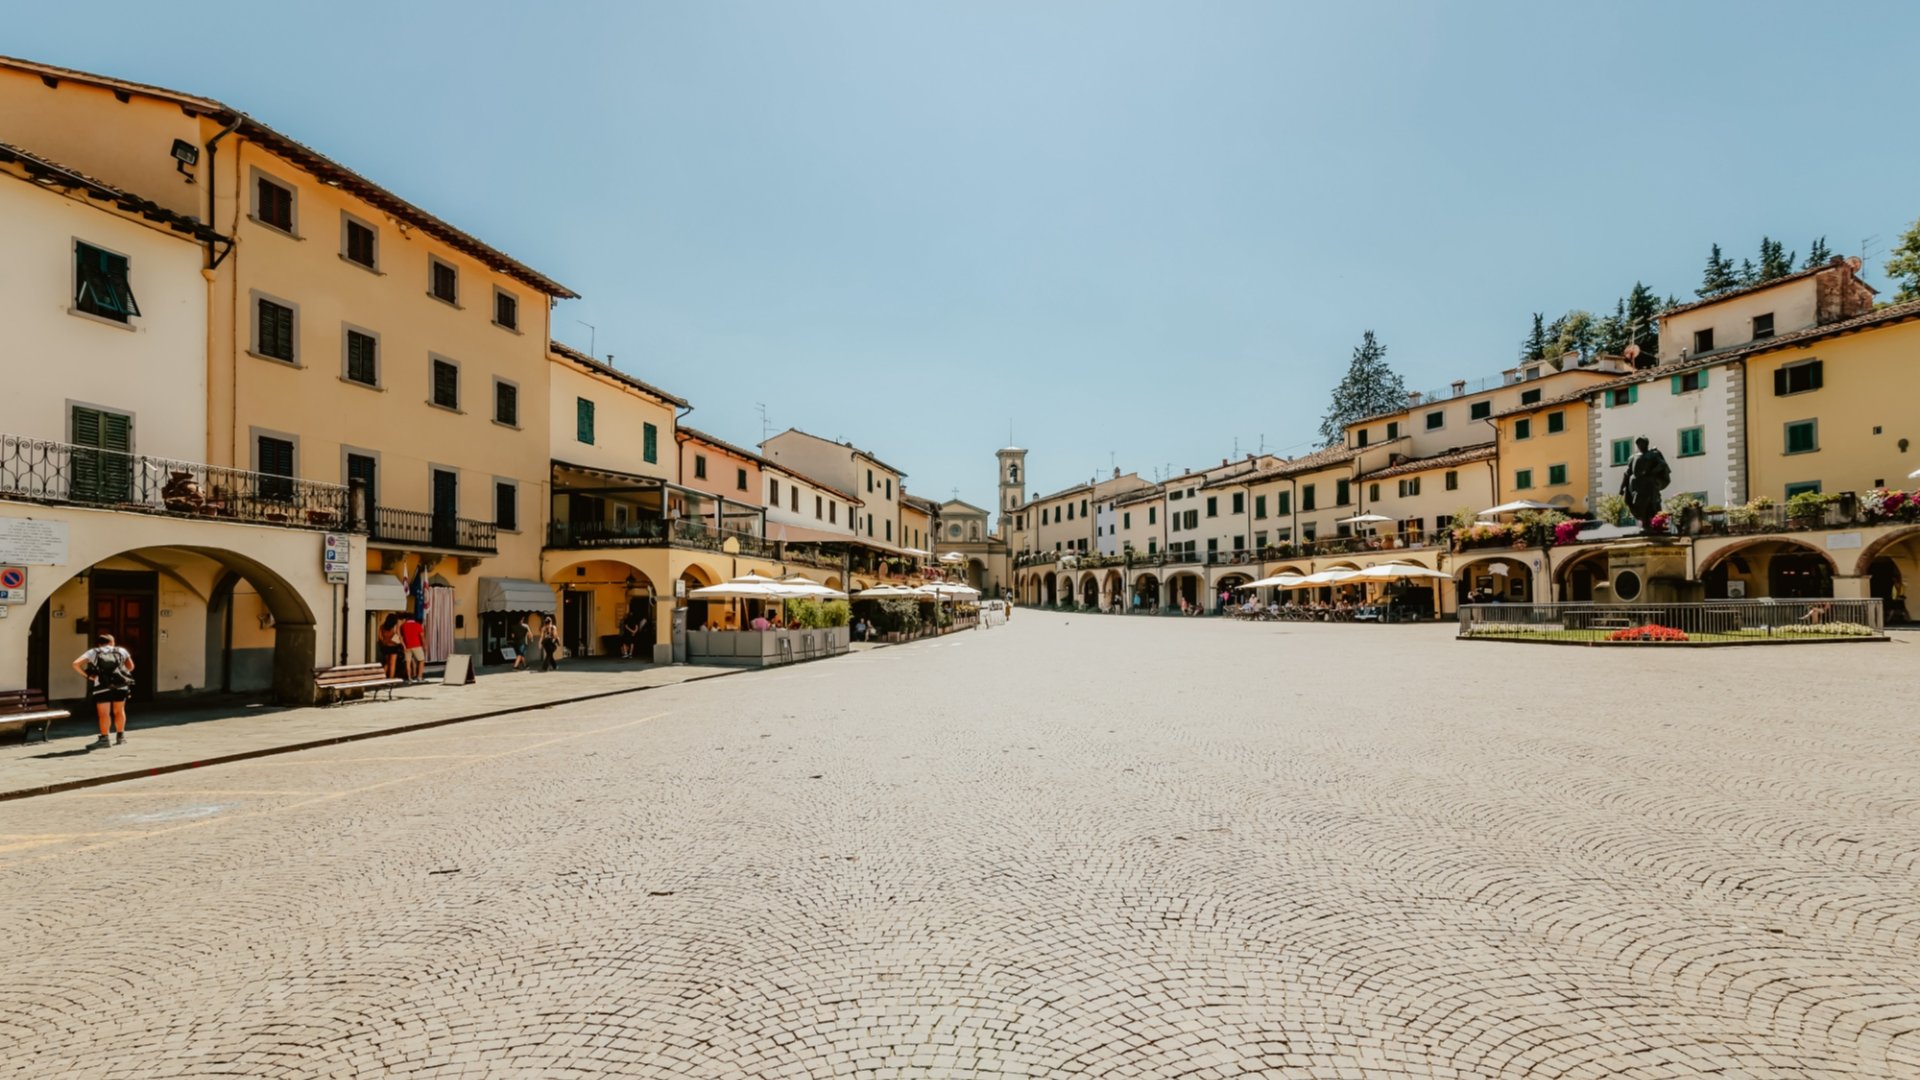 The hike experience will depart from the piazza Matteotti, the heart of Greve in Chianti village.